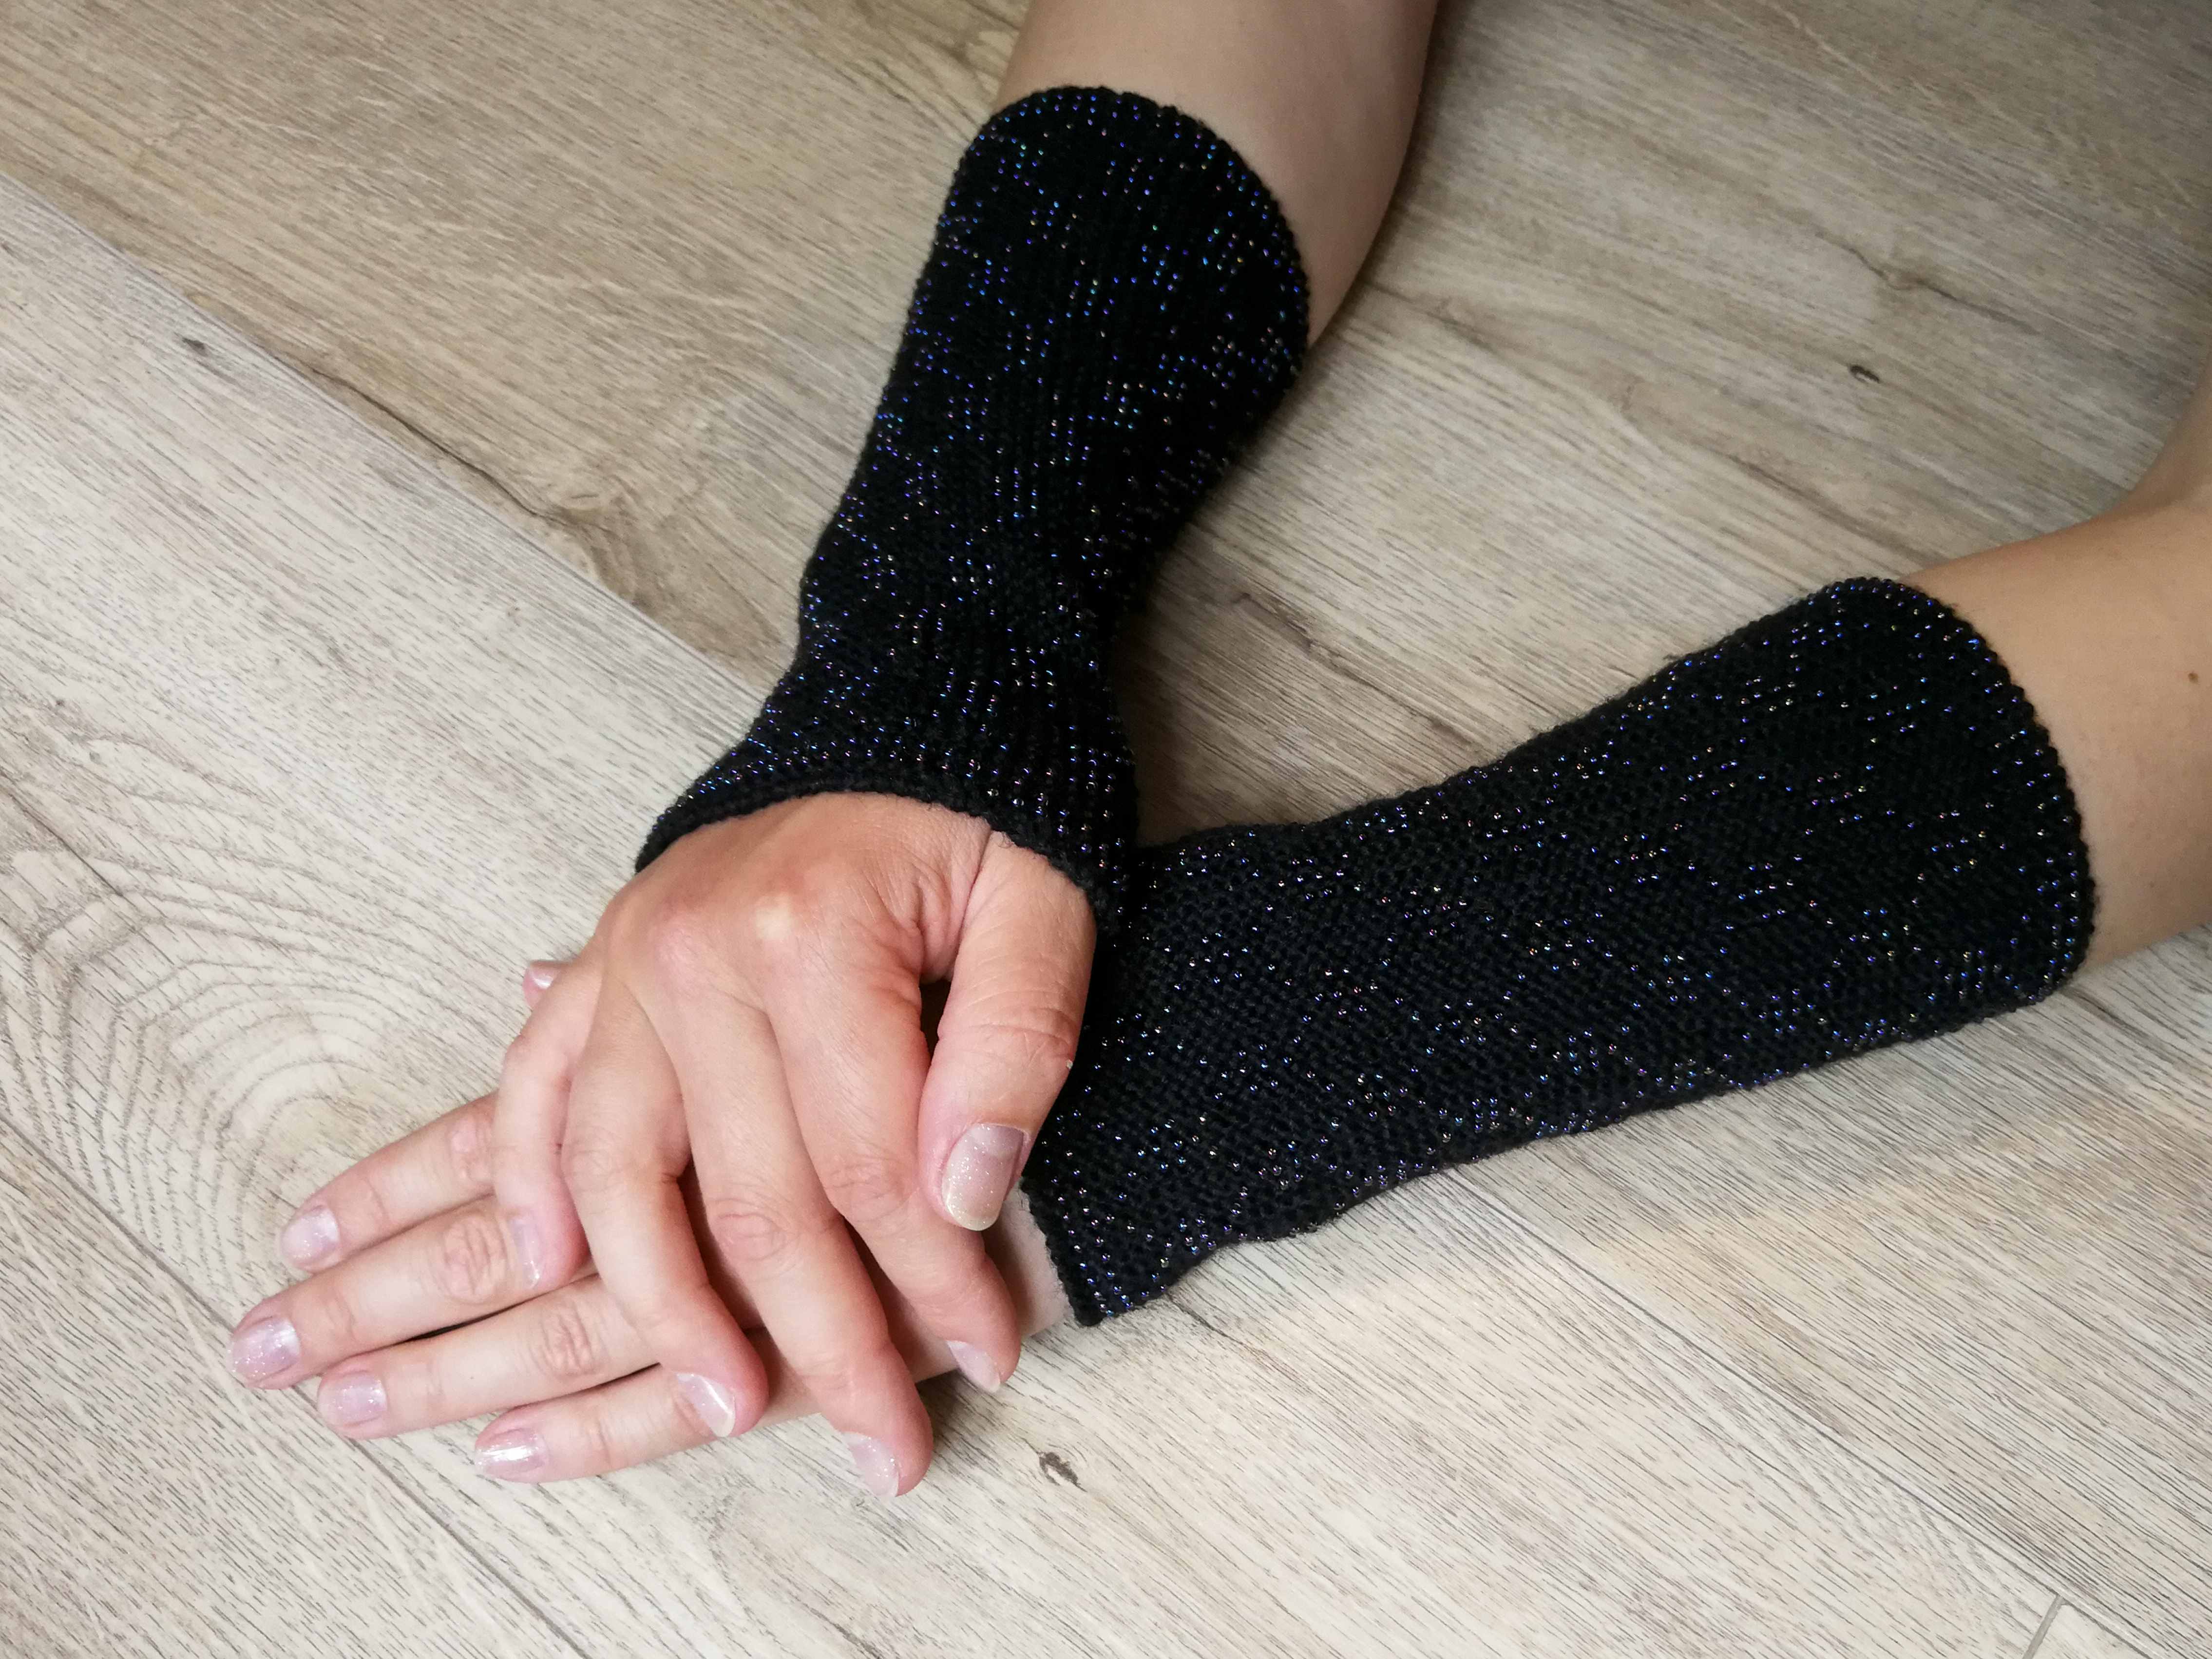 A woman wears a pair of unique arm warmers to express her personal style.